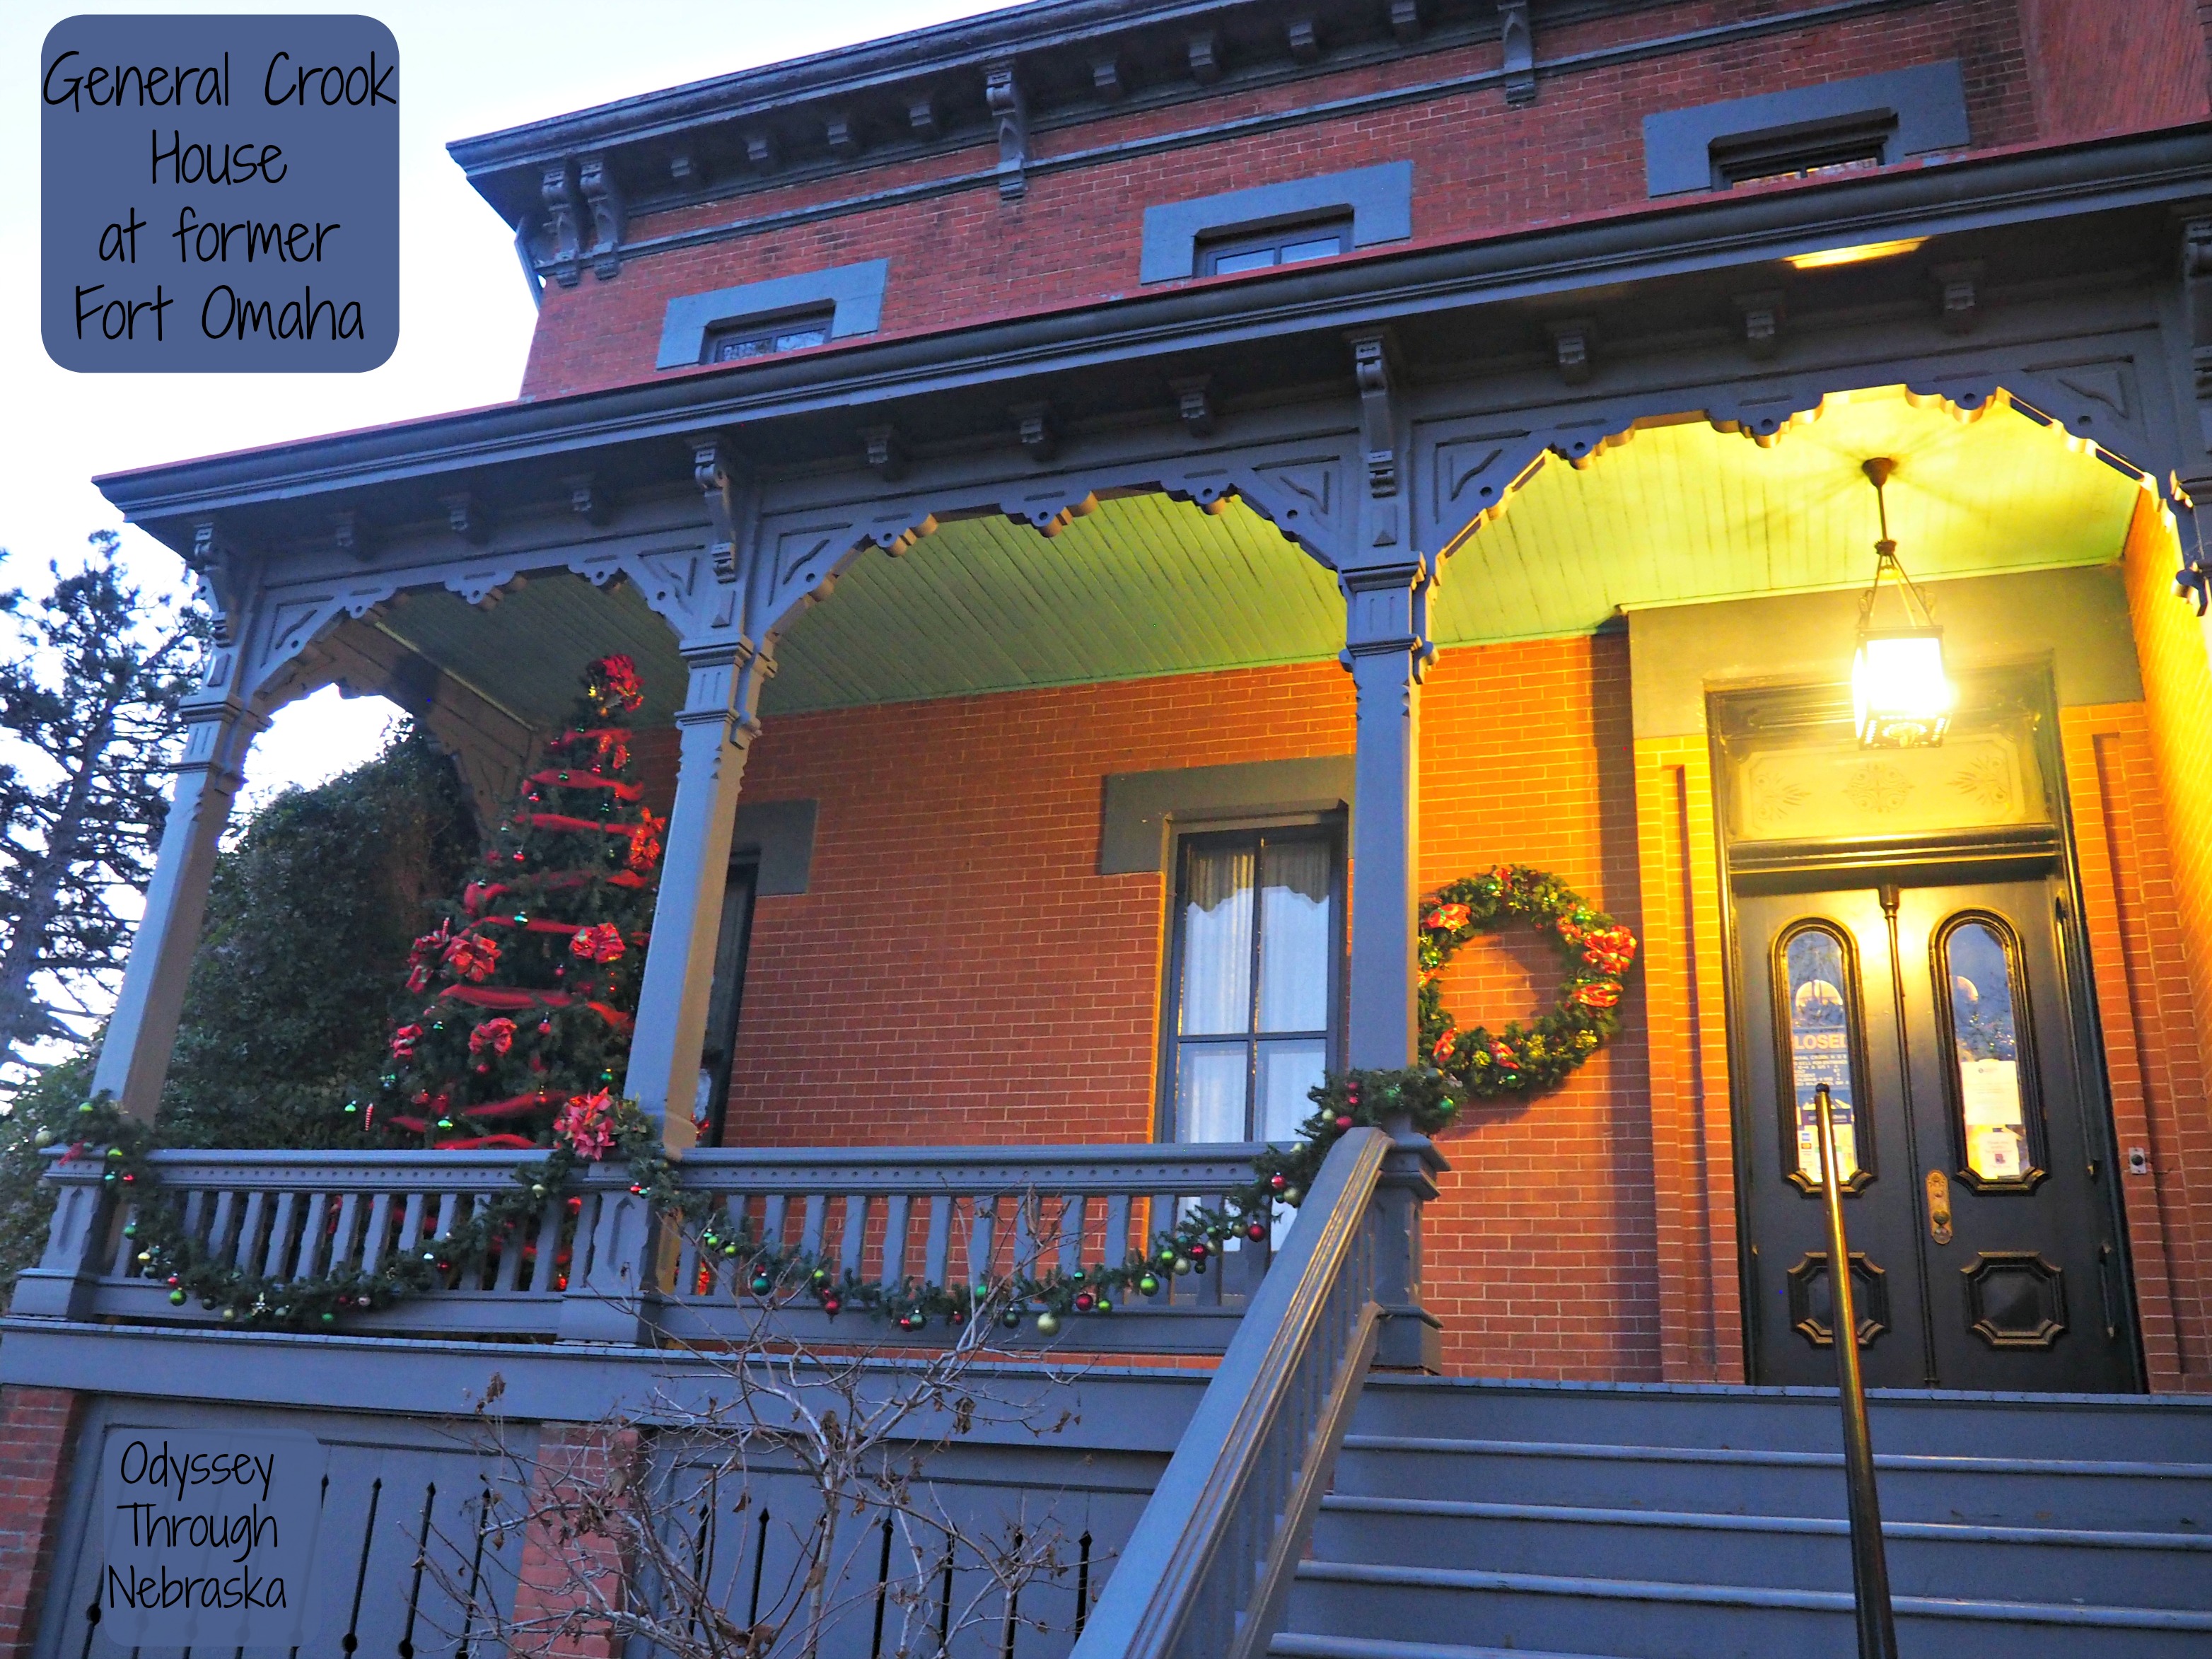 General Crook House Christmas